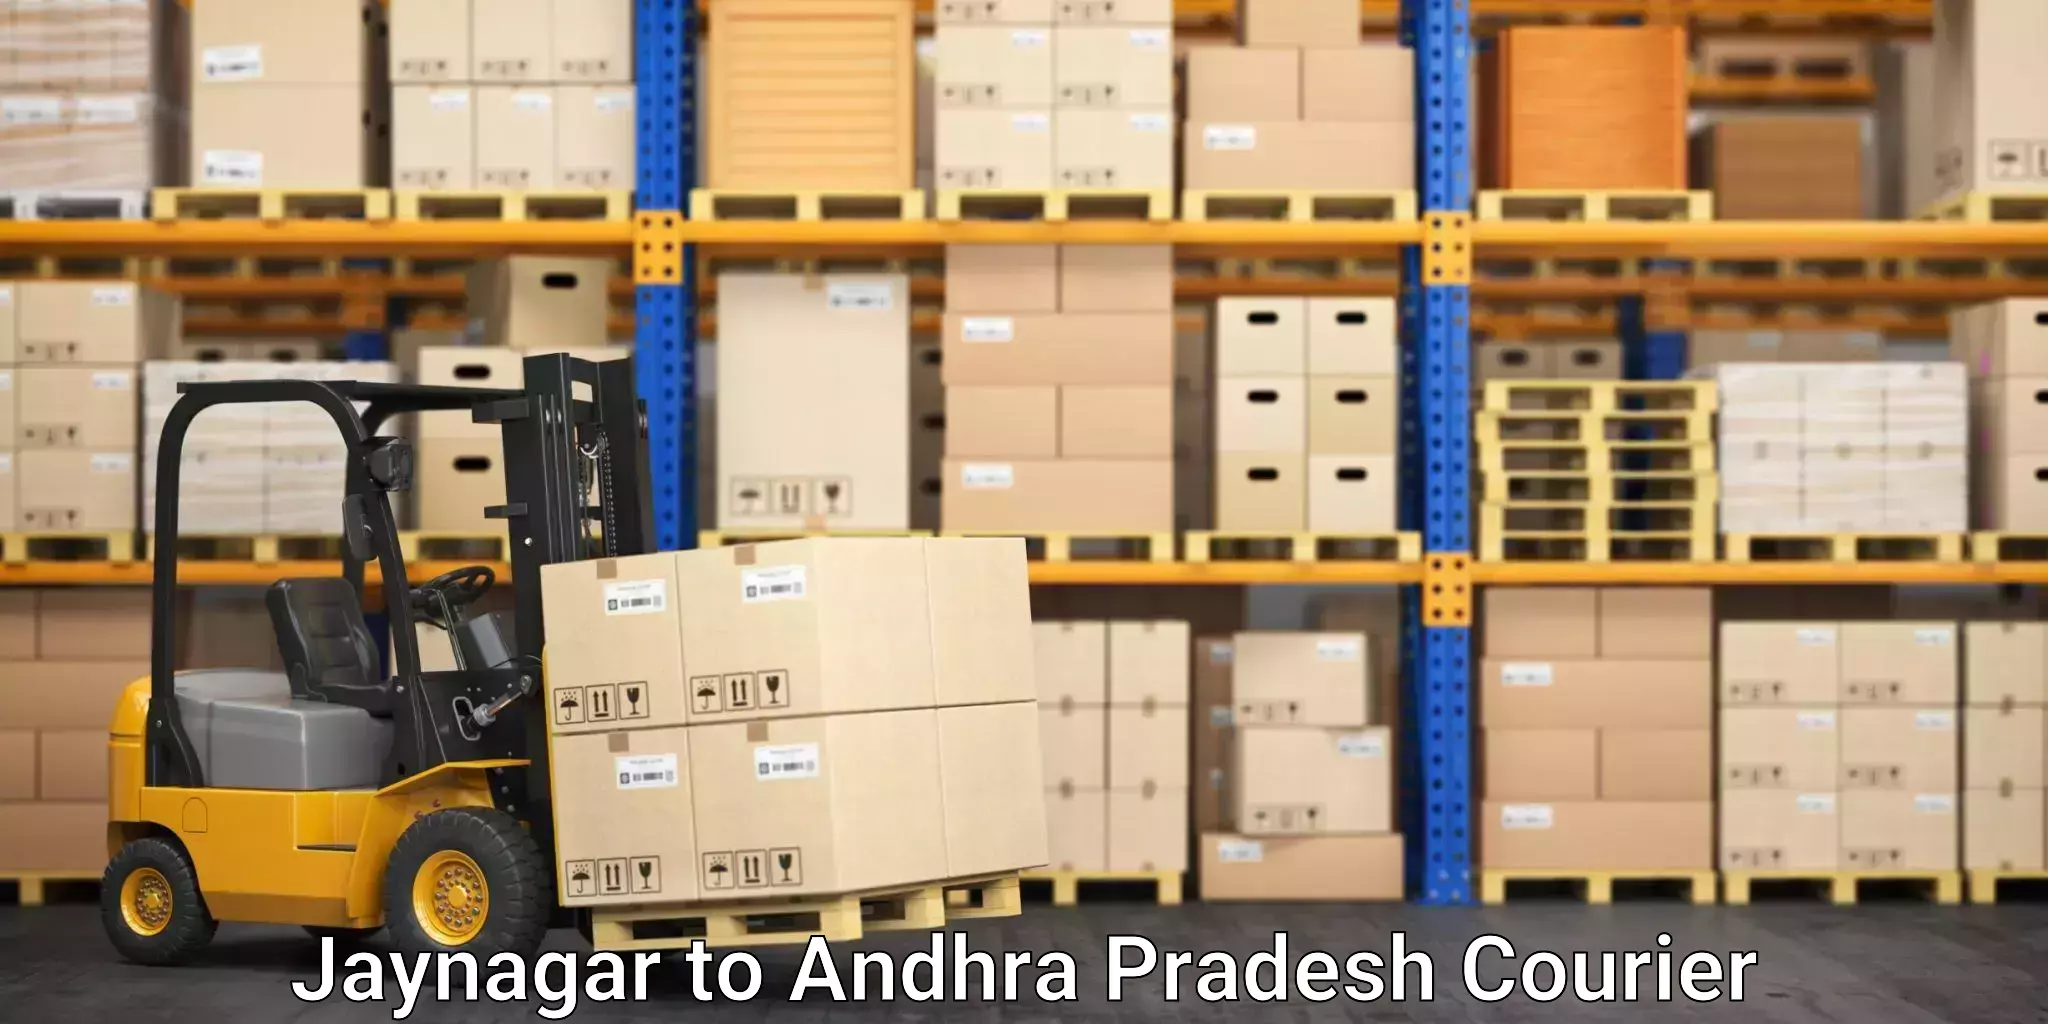 Budget-friendly movers in Jaynagar to Gollaprollu